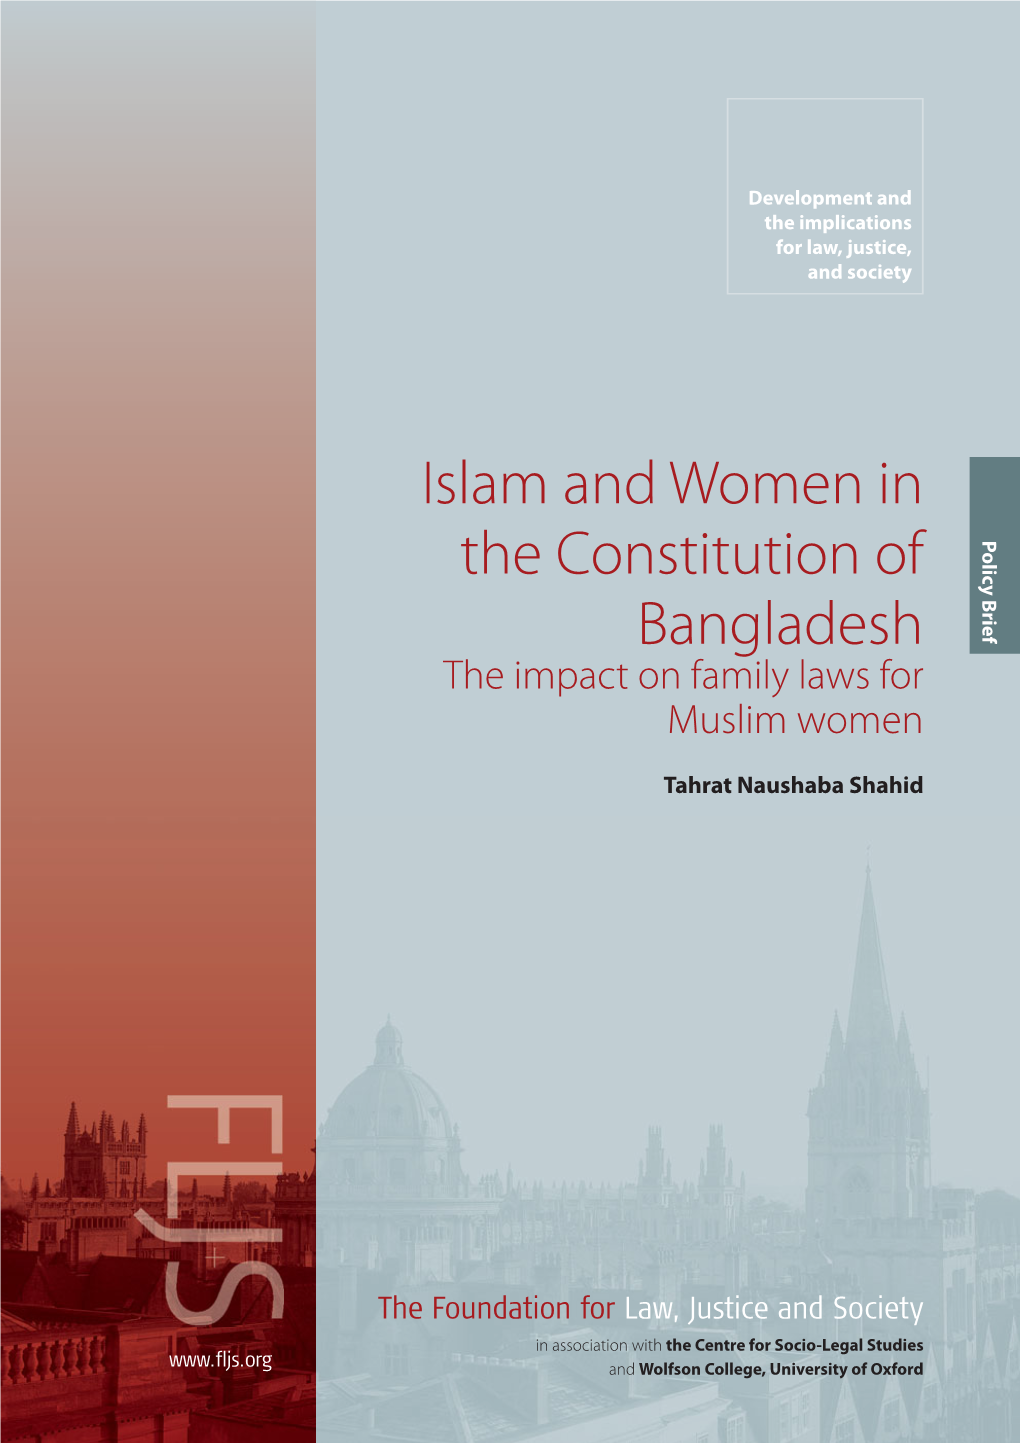 Islam and Women in the Constitution of Bangladesh the Impact on Family Laws for Muslim Women